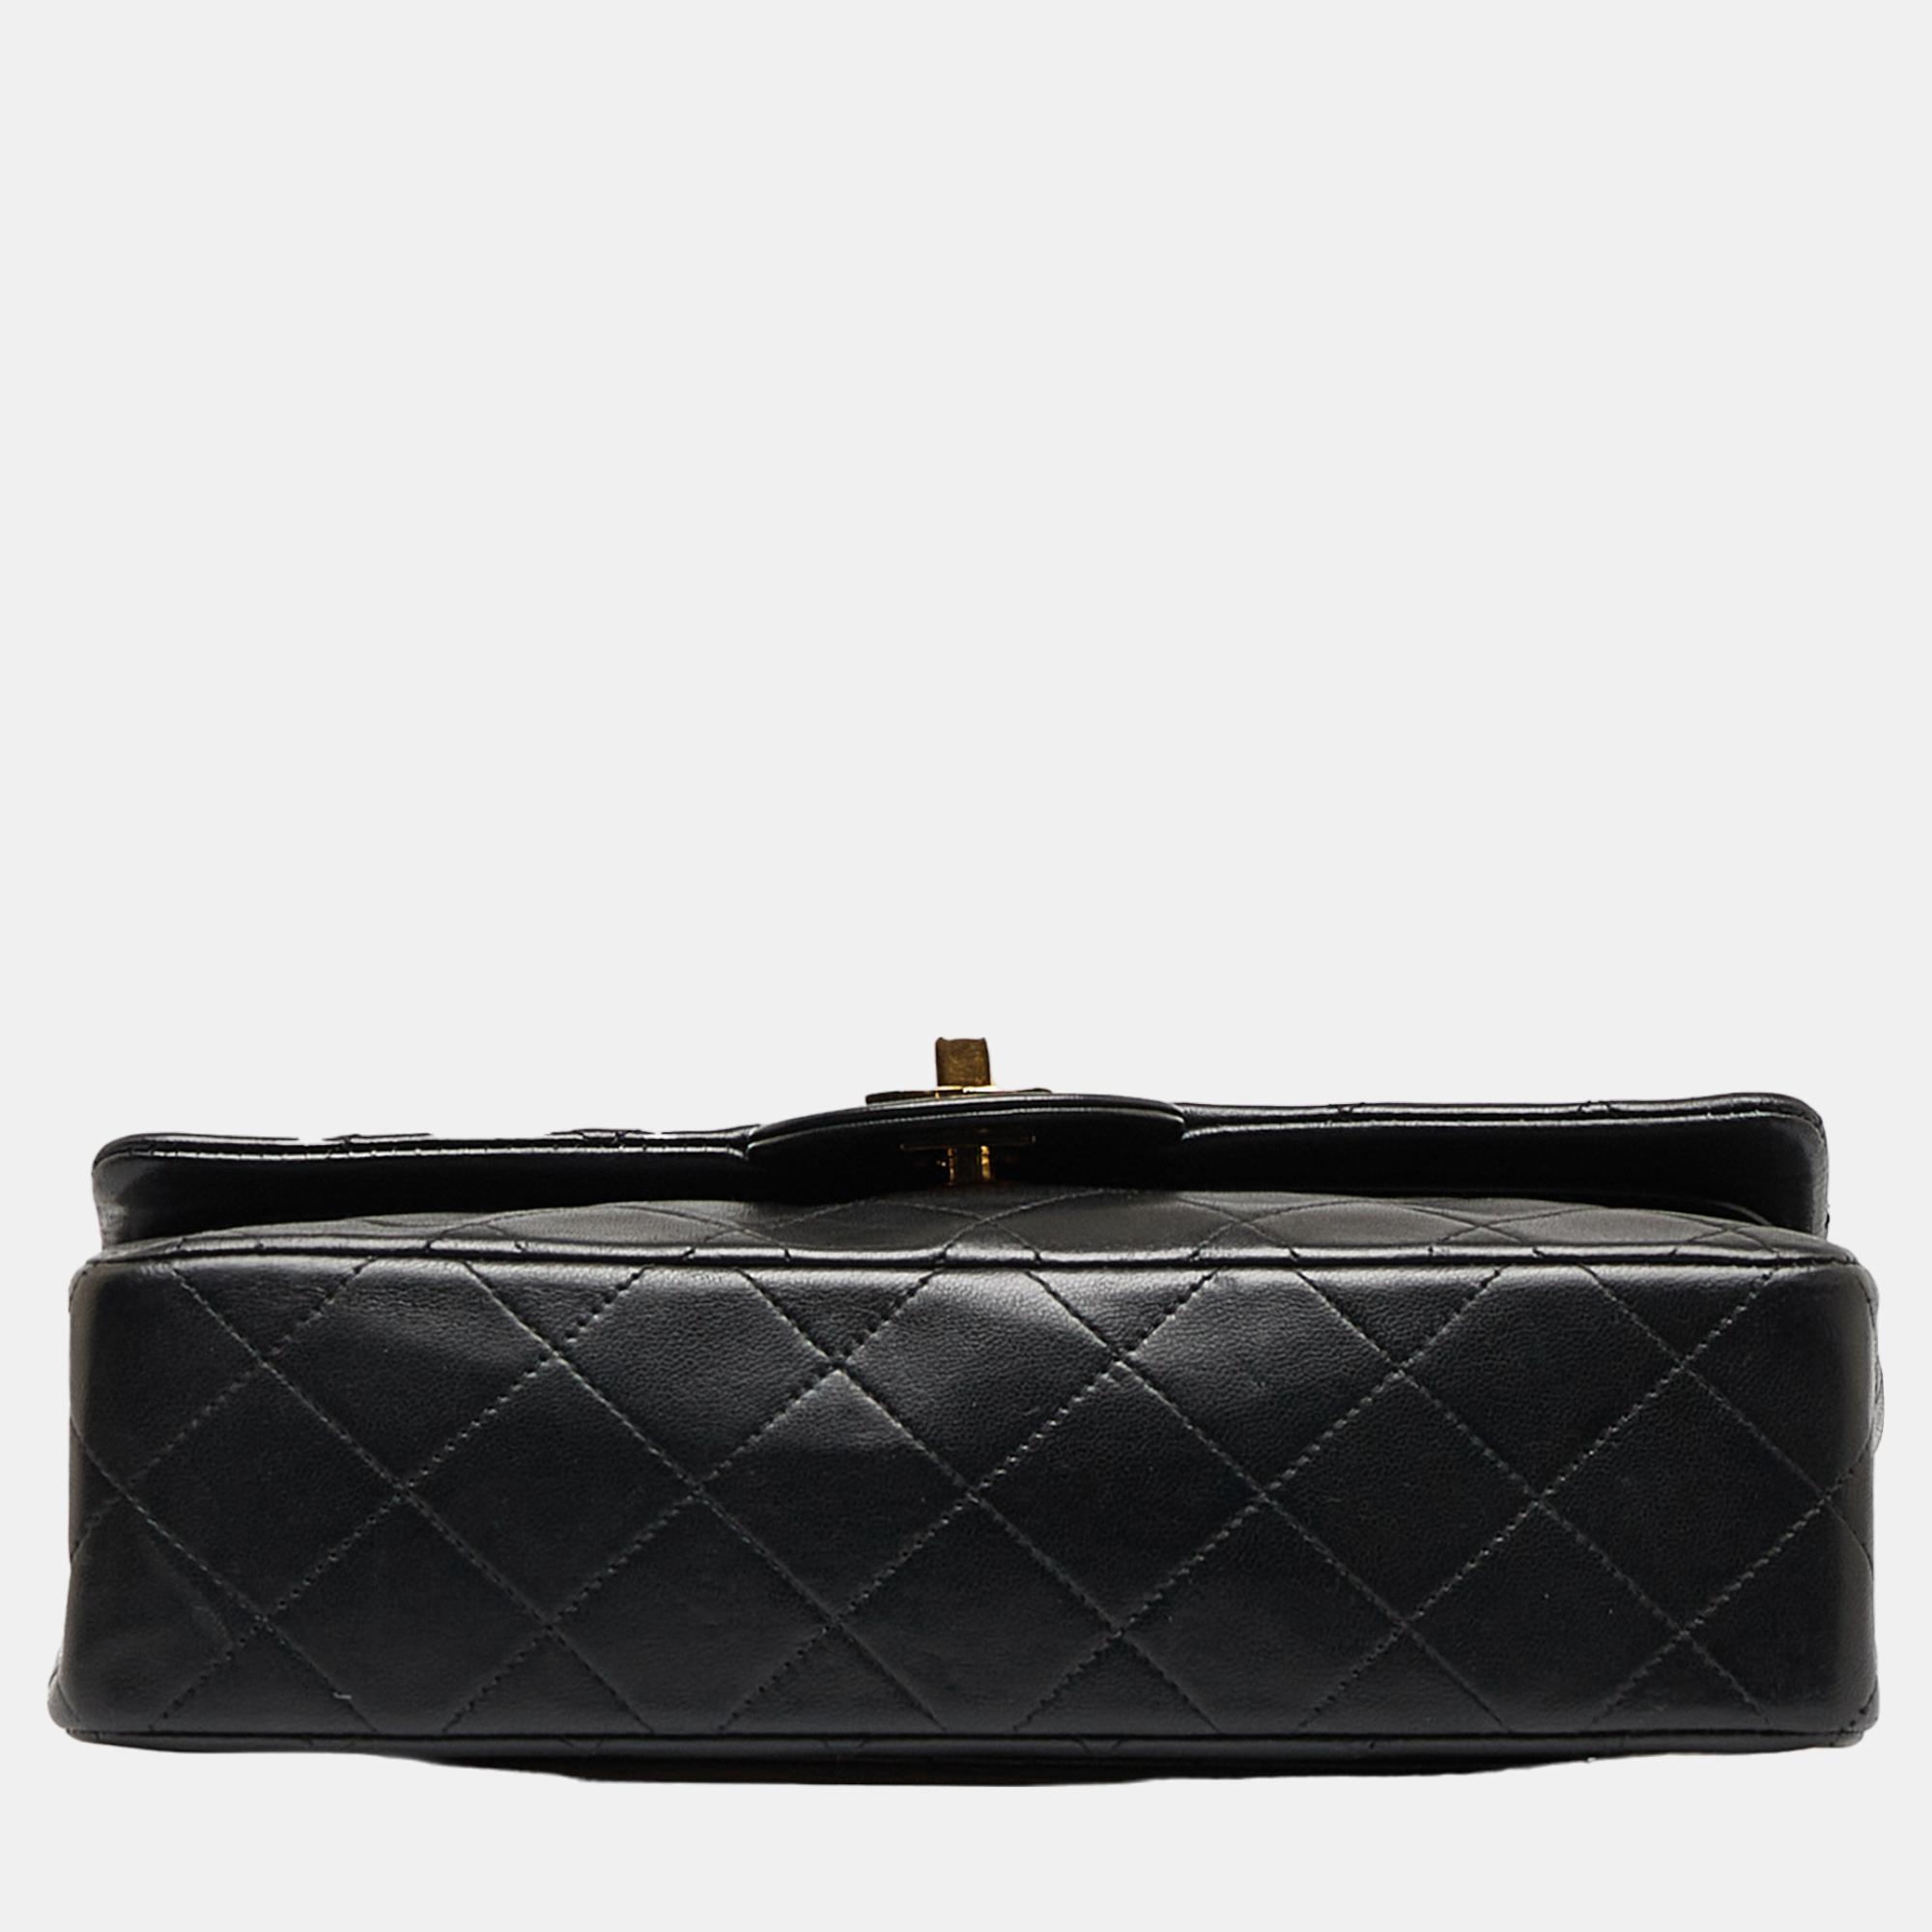 Chanel Black Small Classic Lambskin Double Flap Bag